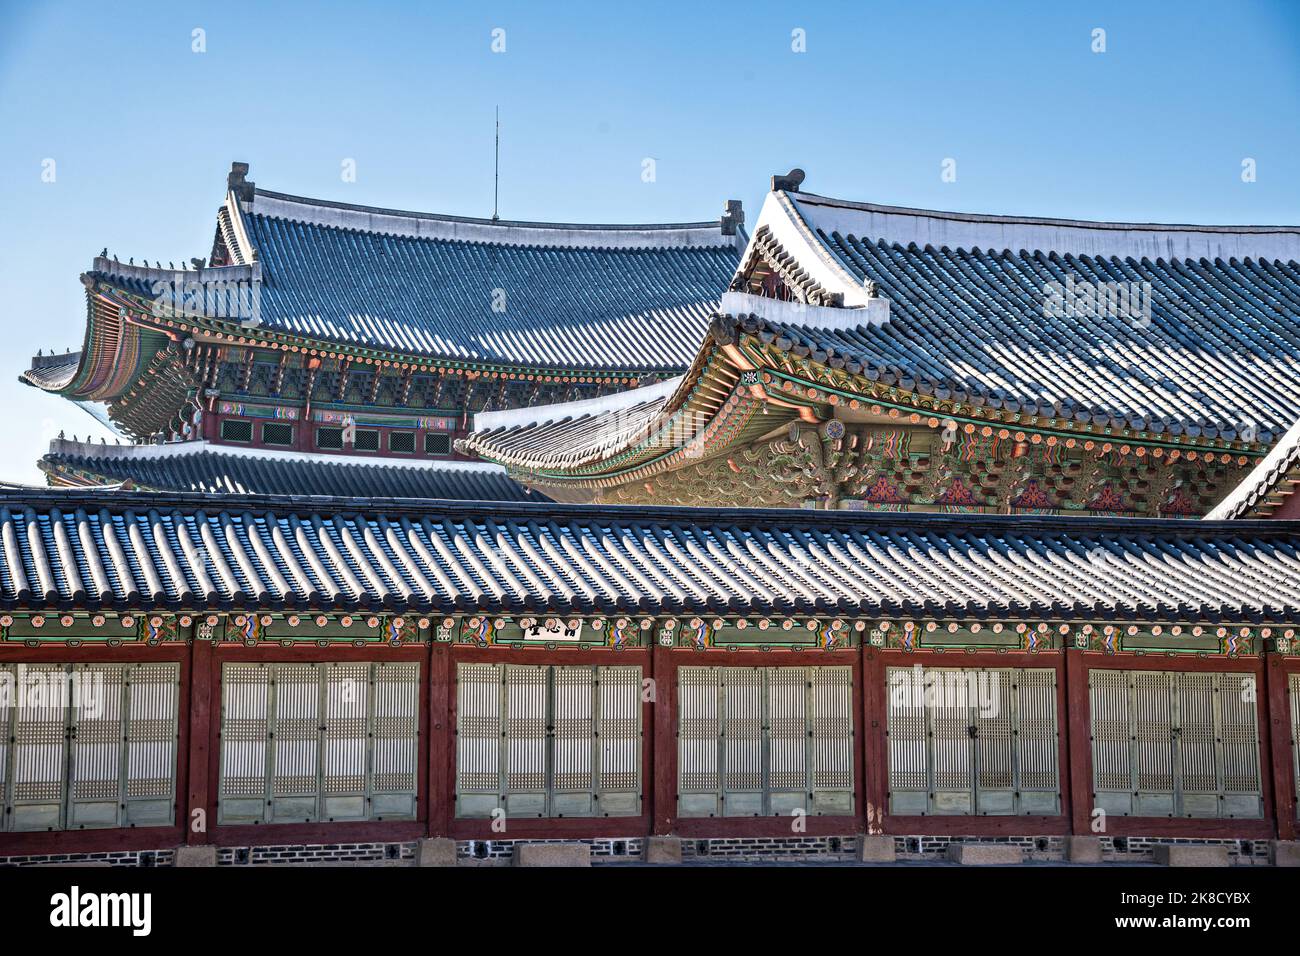 Traditional Korean roofs dusted with snow at the Gyeongbokgung Palace during winter in Seoul, South Korea. Stock Photo